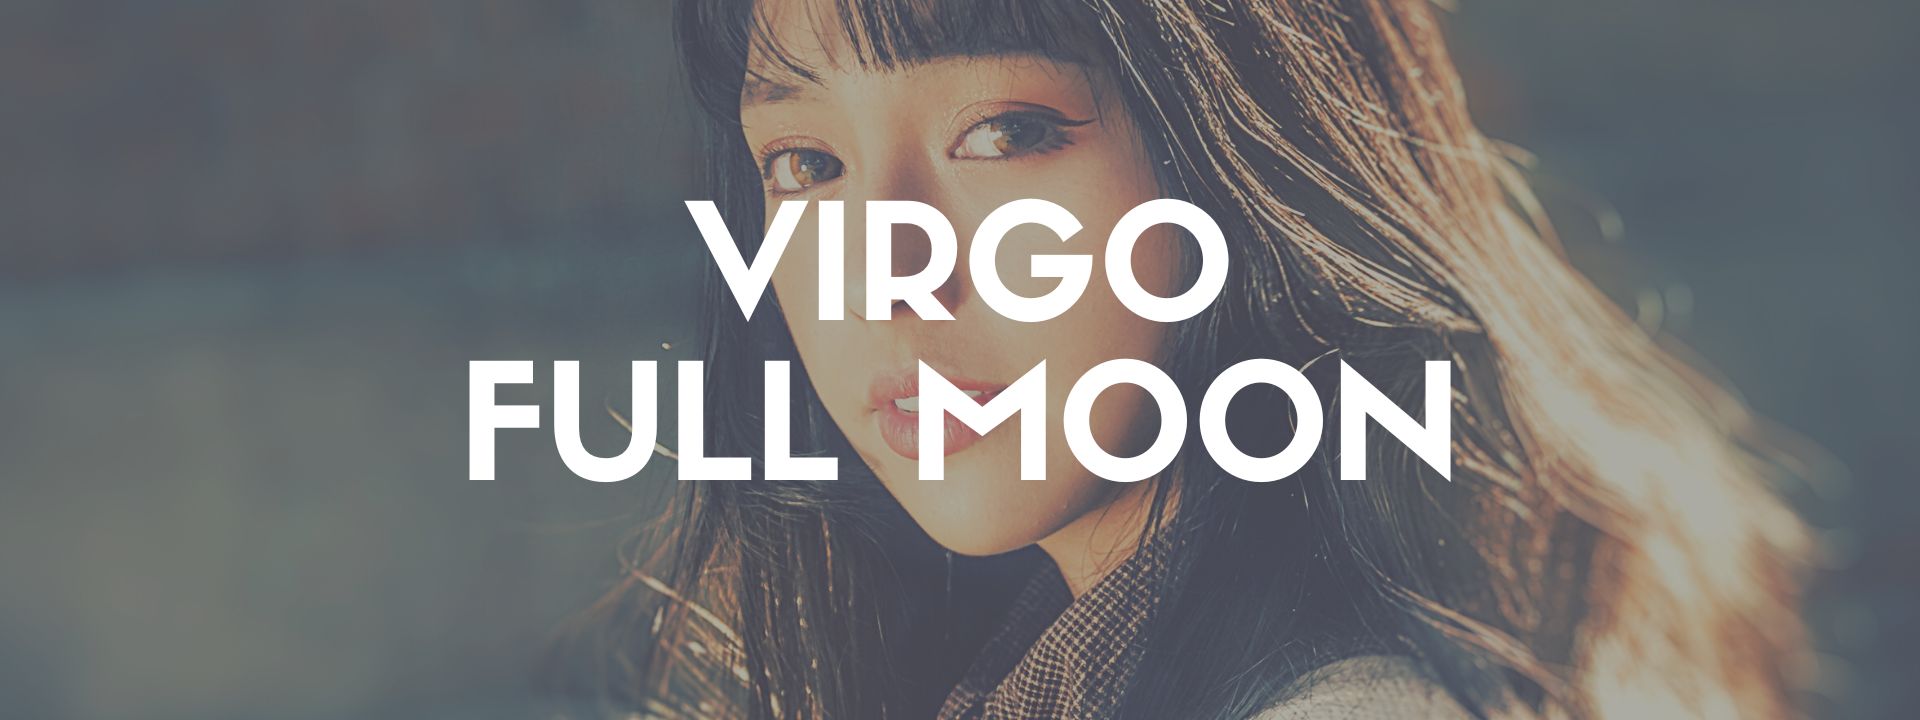 March 2023 New & Full Moons: Full Moon in Virgo & New Moon in Aries - The Dark Pixie Astrology